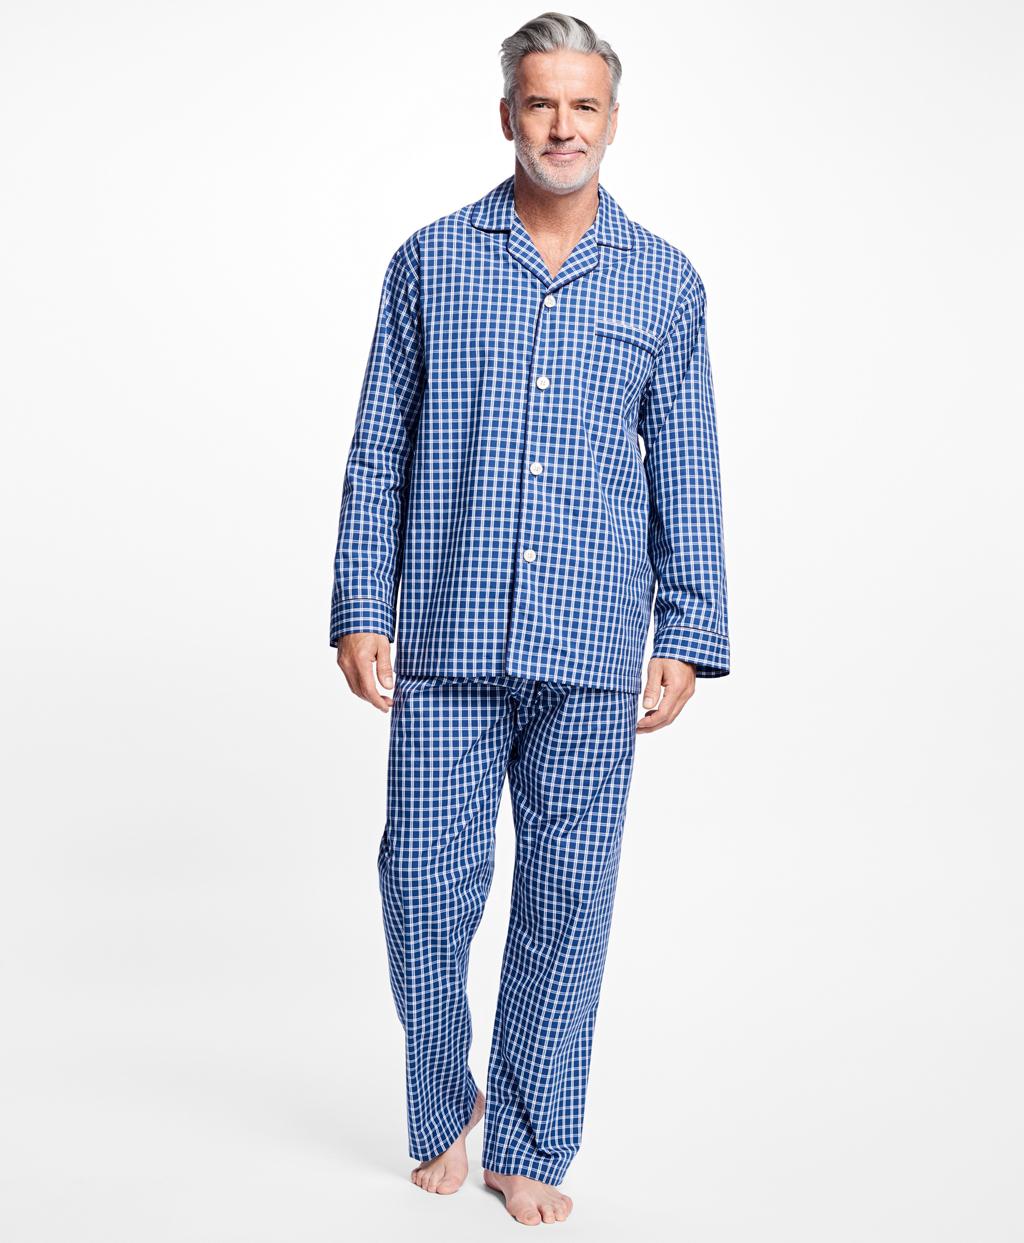 Lyst - Brooks brothers Graph Check Pajamas in Blue for Men